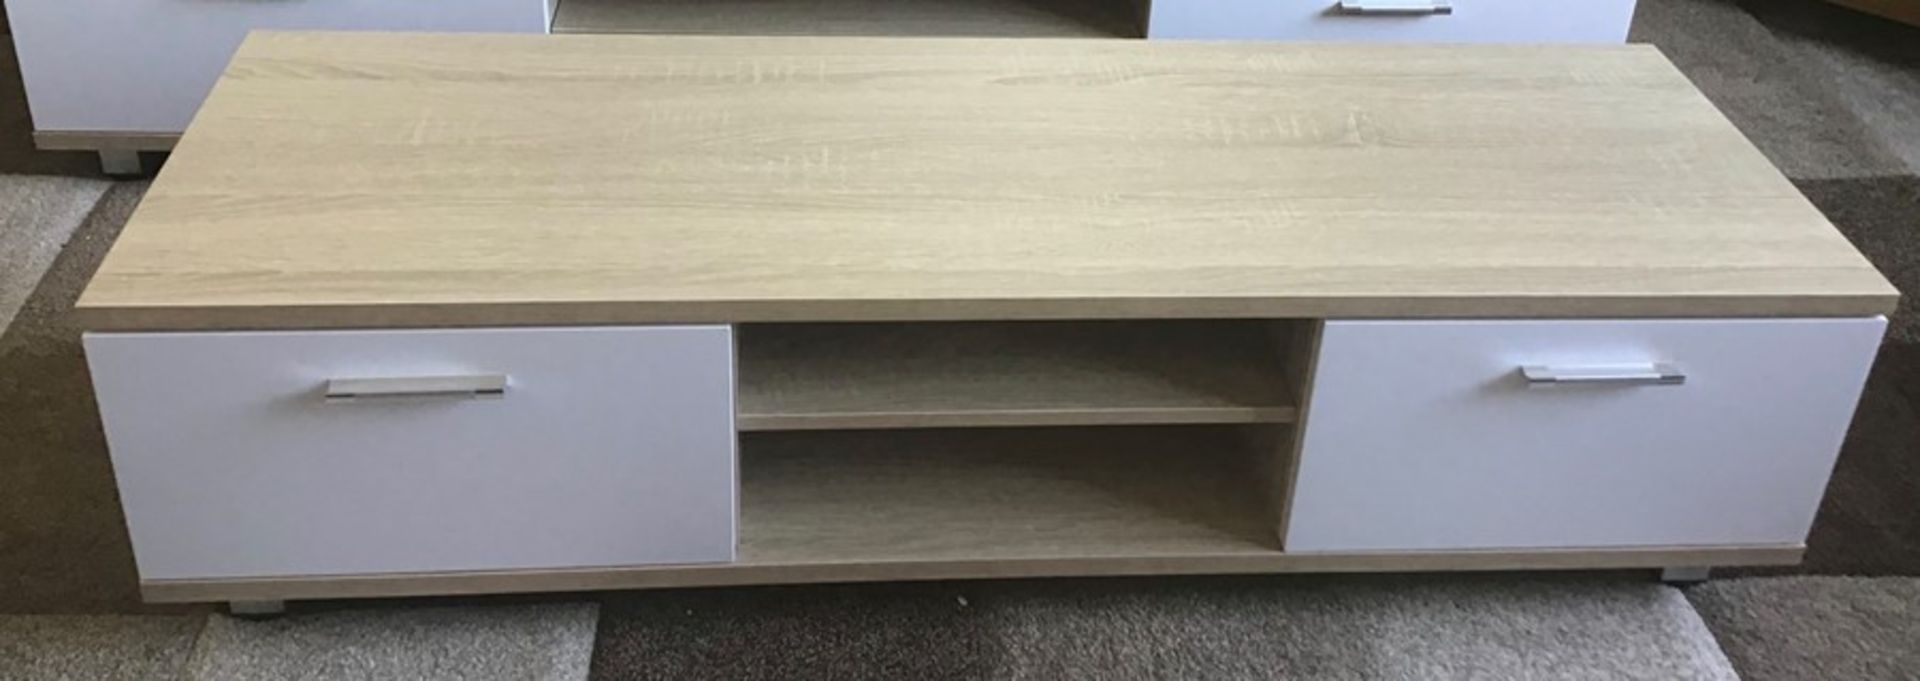 Oak and white 168cm TV stand, brand new, flat packed and boxed. RRP Circa £100.00 | 1x Box - Image 3 of 3